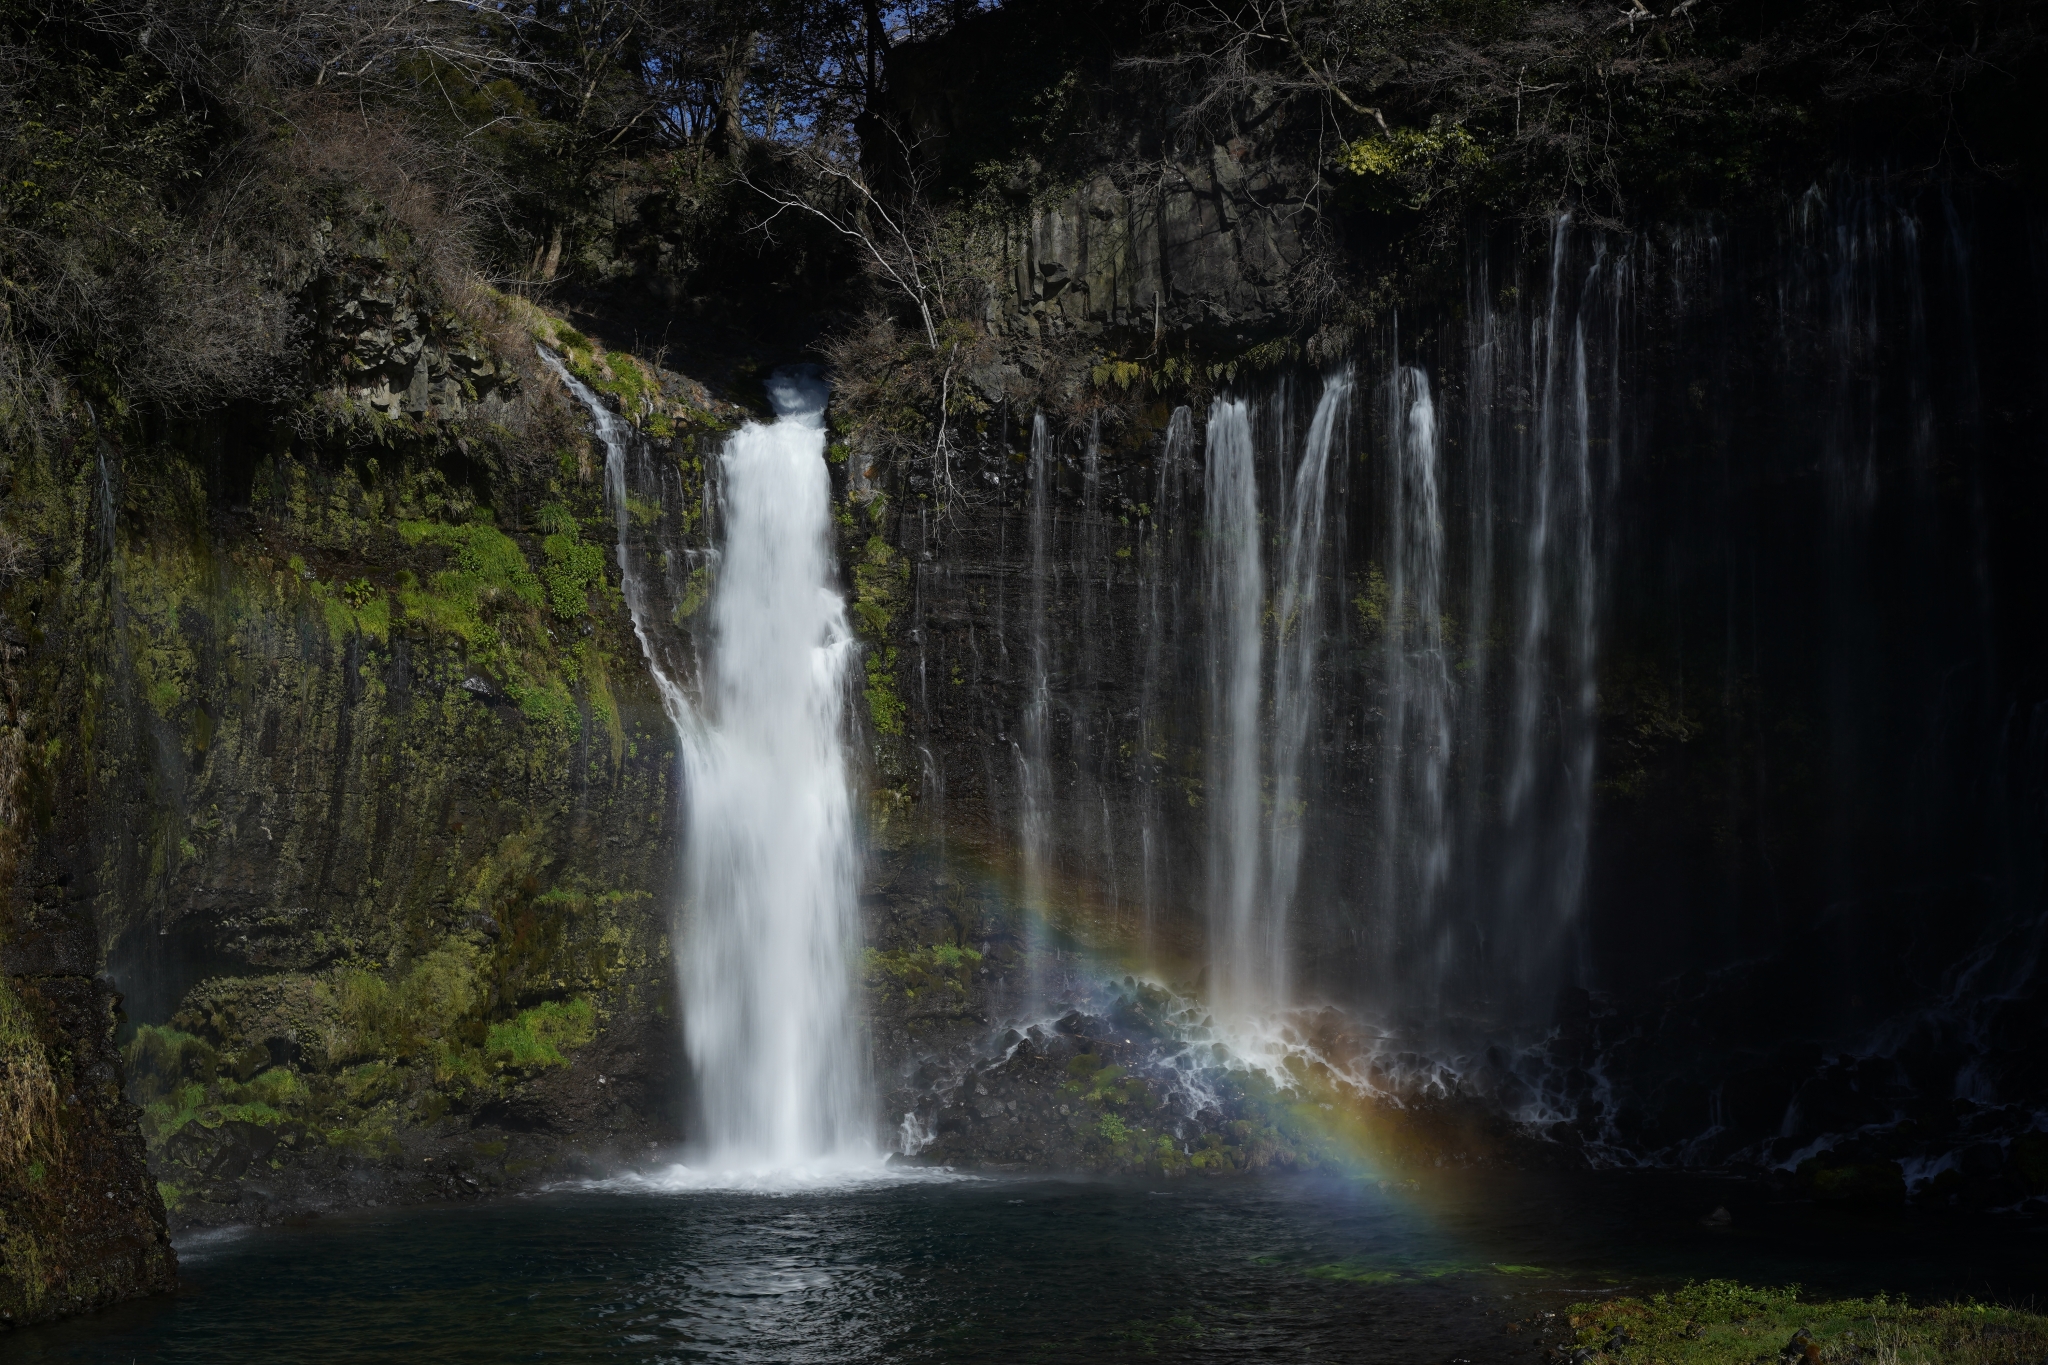 Wide waterfall with forested surroundings and a rainbow visible in the water spray